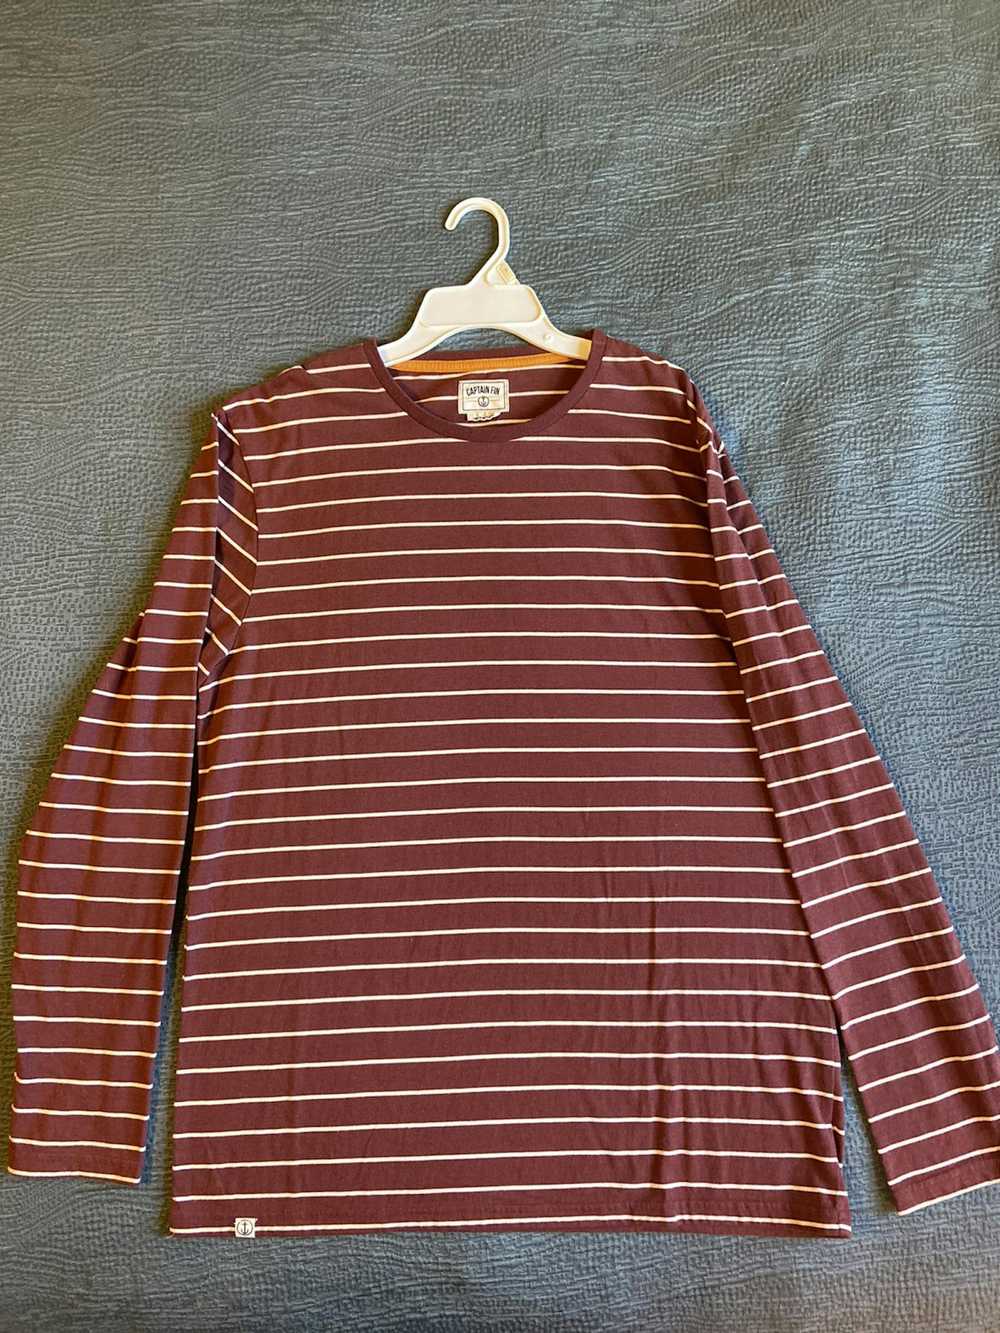 Captain Fin& Co. Striped Long Sleeve Tee - image 2